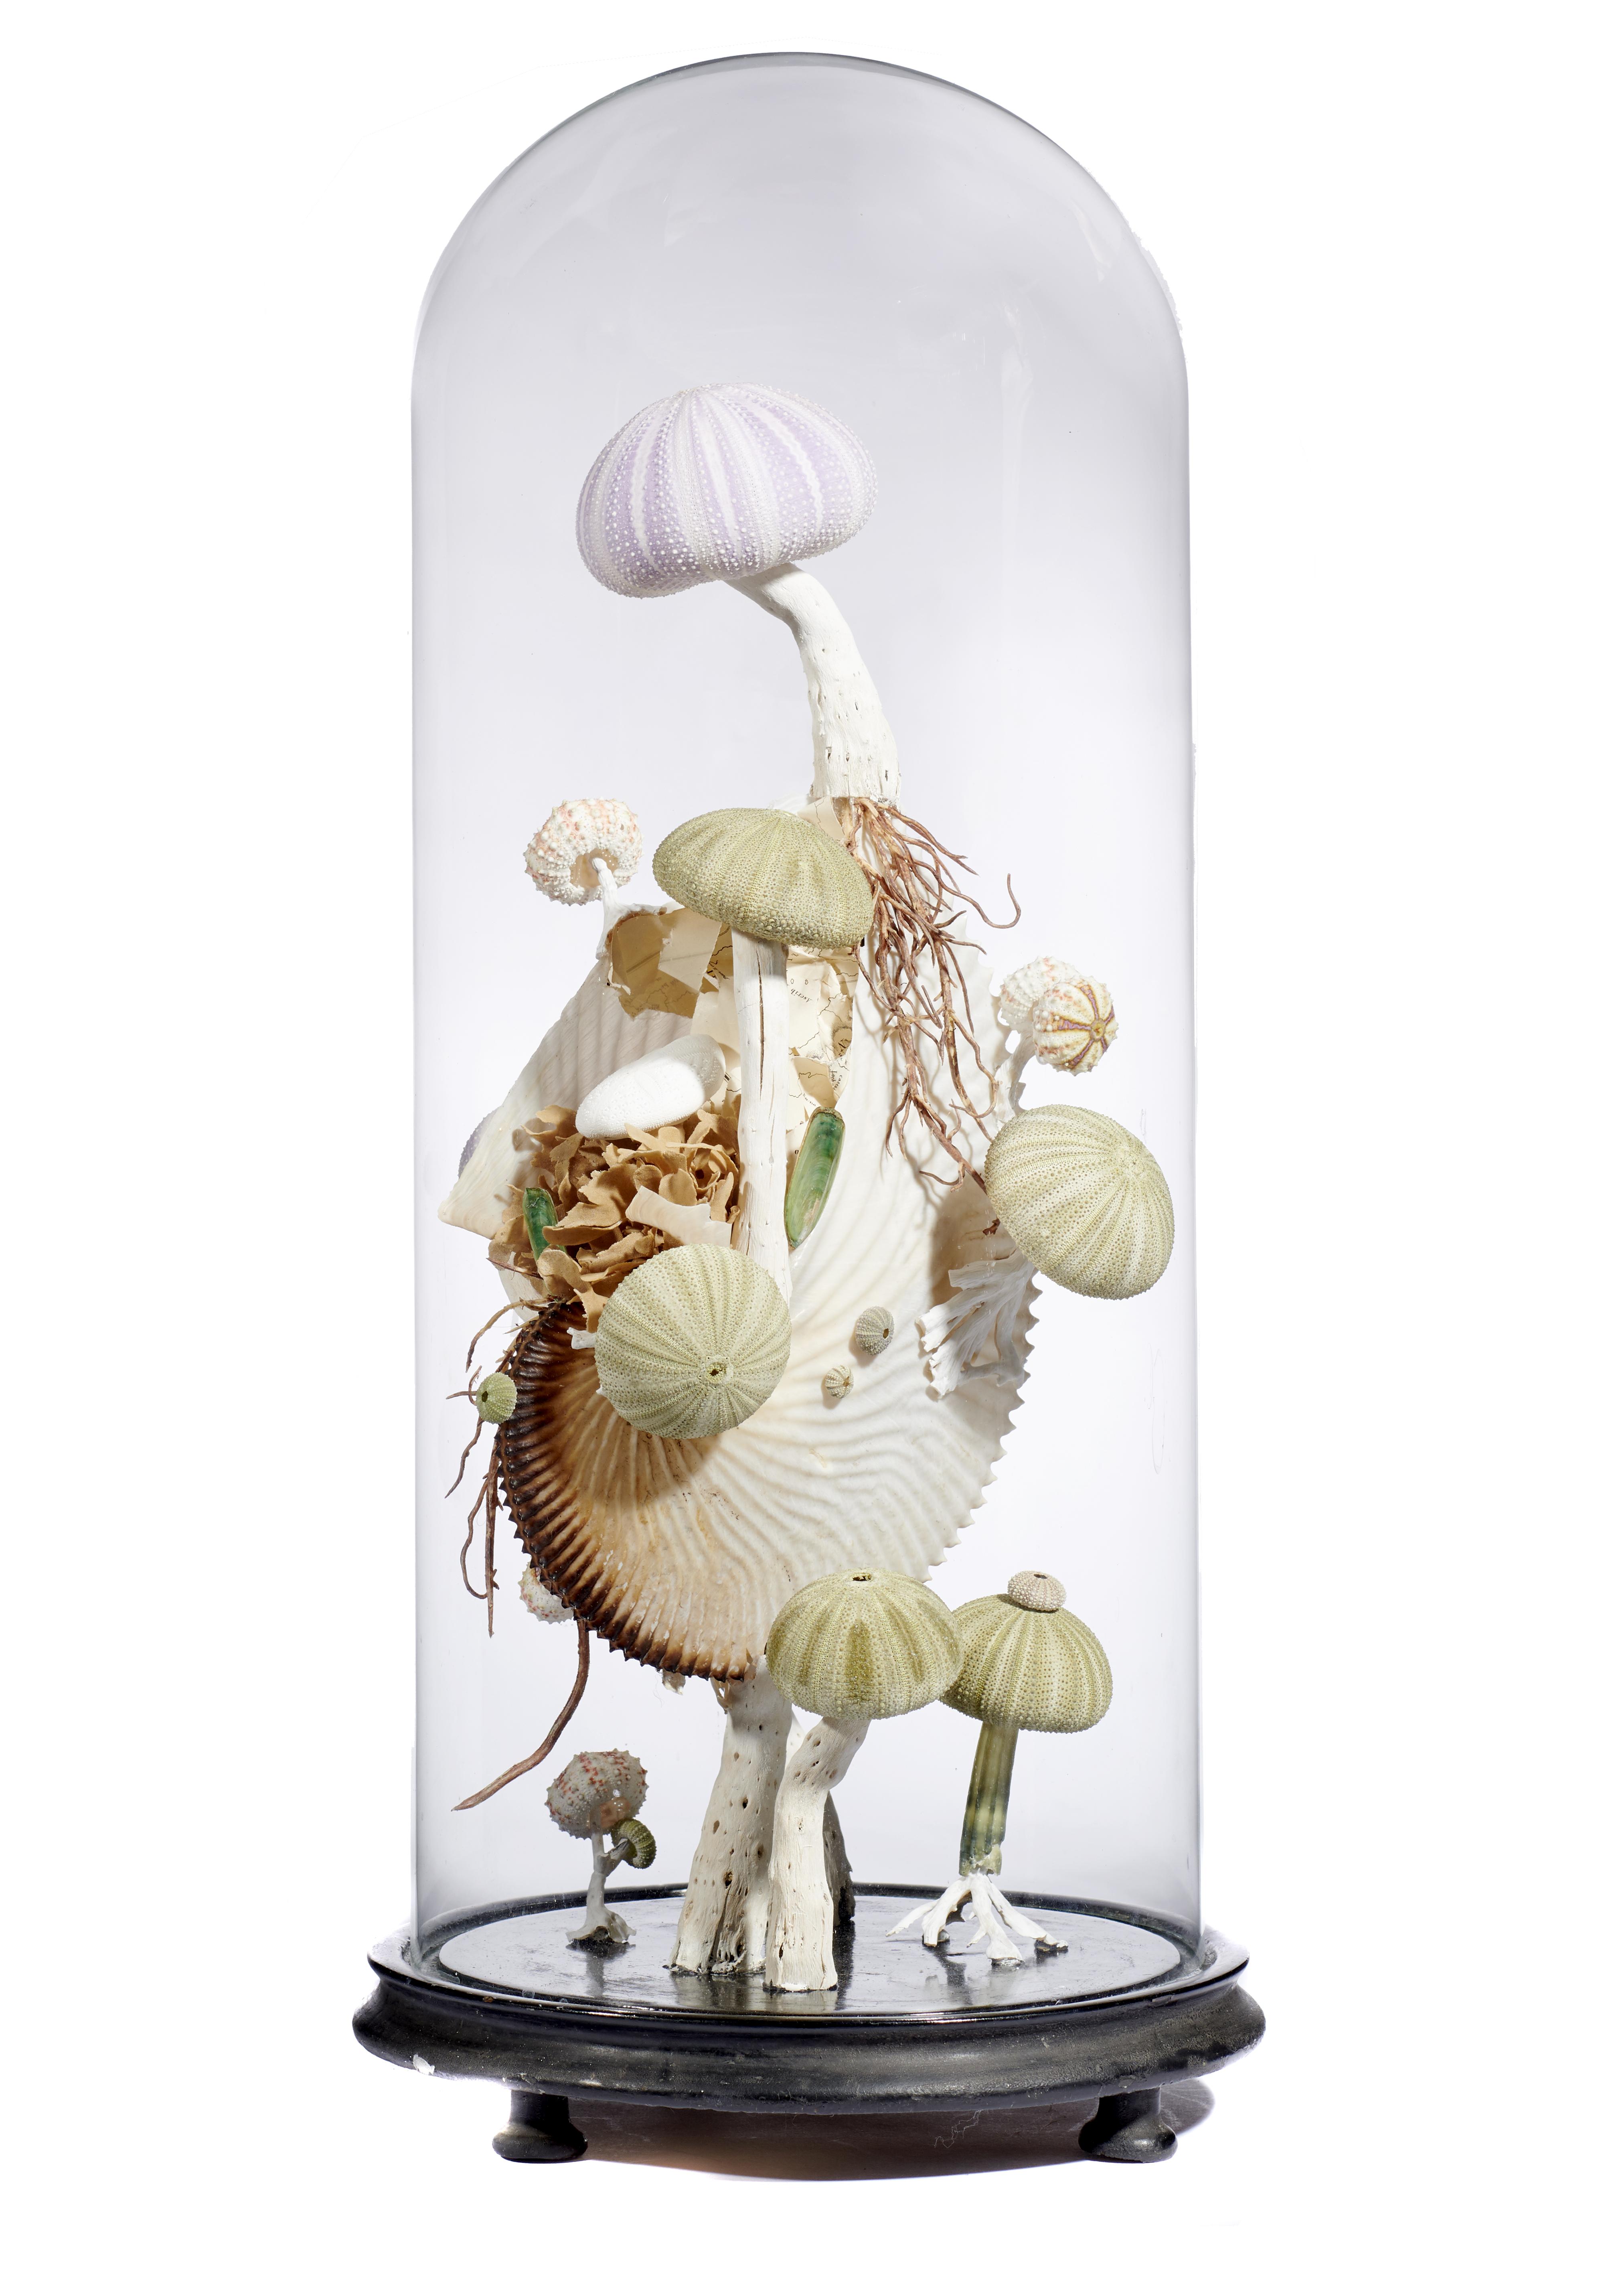 A sea urchin and mushroom composition within glass dome 55cm high 